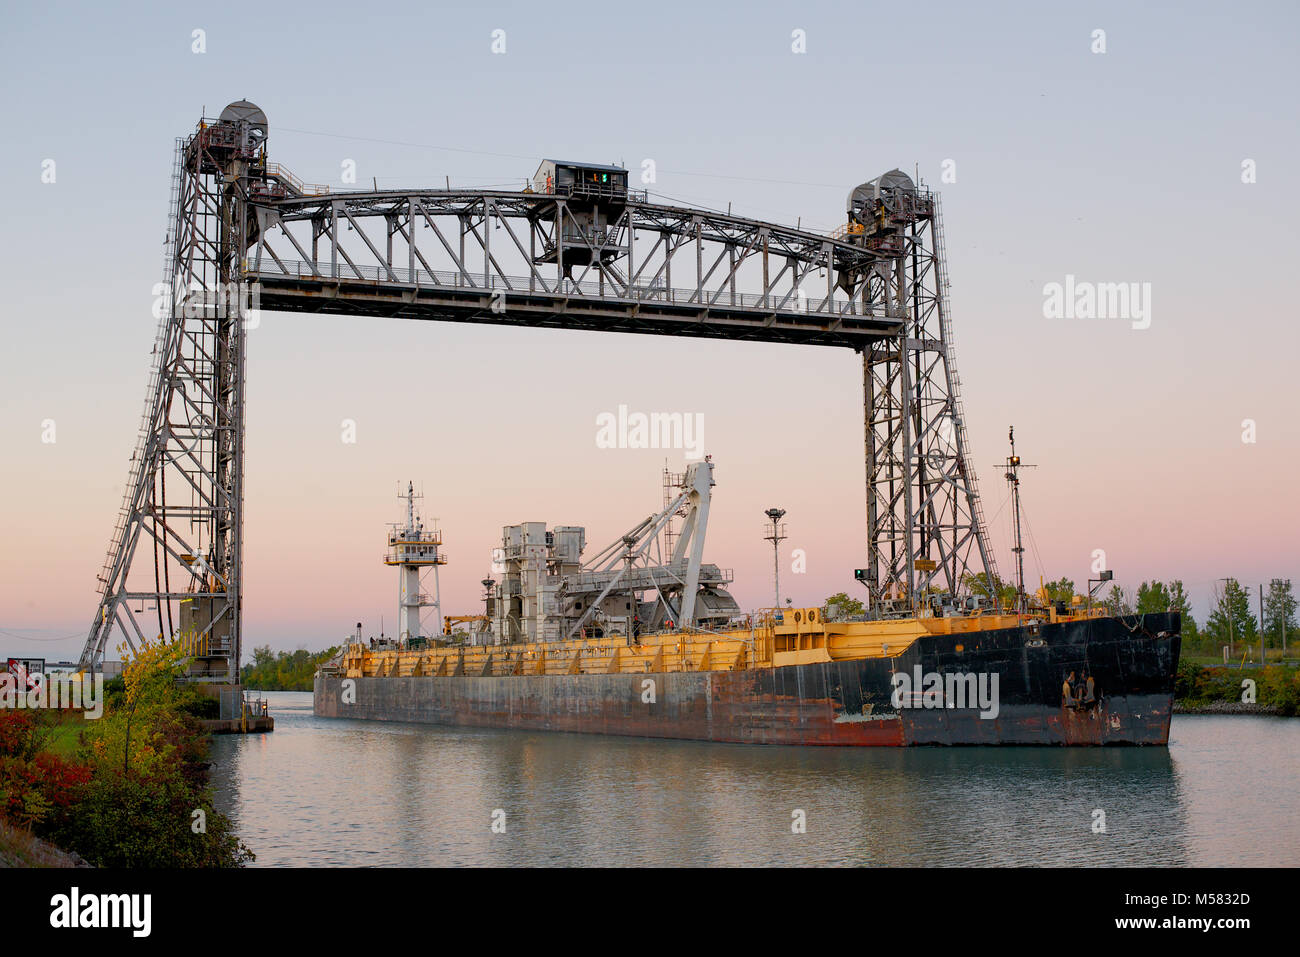 A cement carrier passing through the Welland Canal, Ontario, Canada Stock Photo